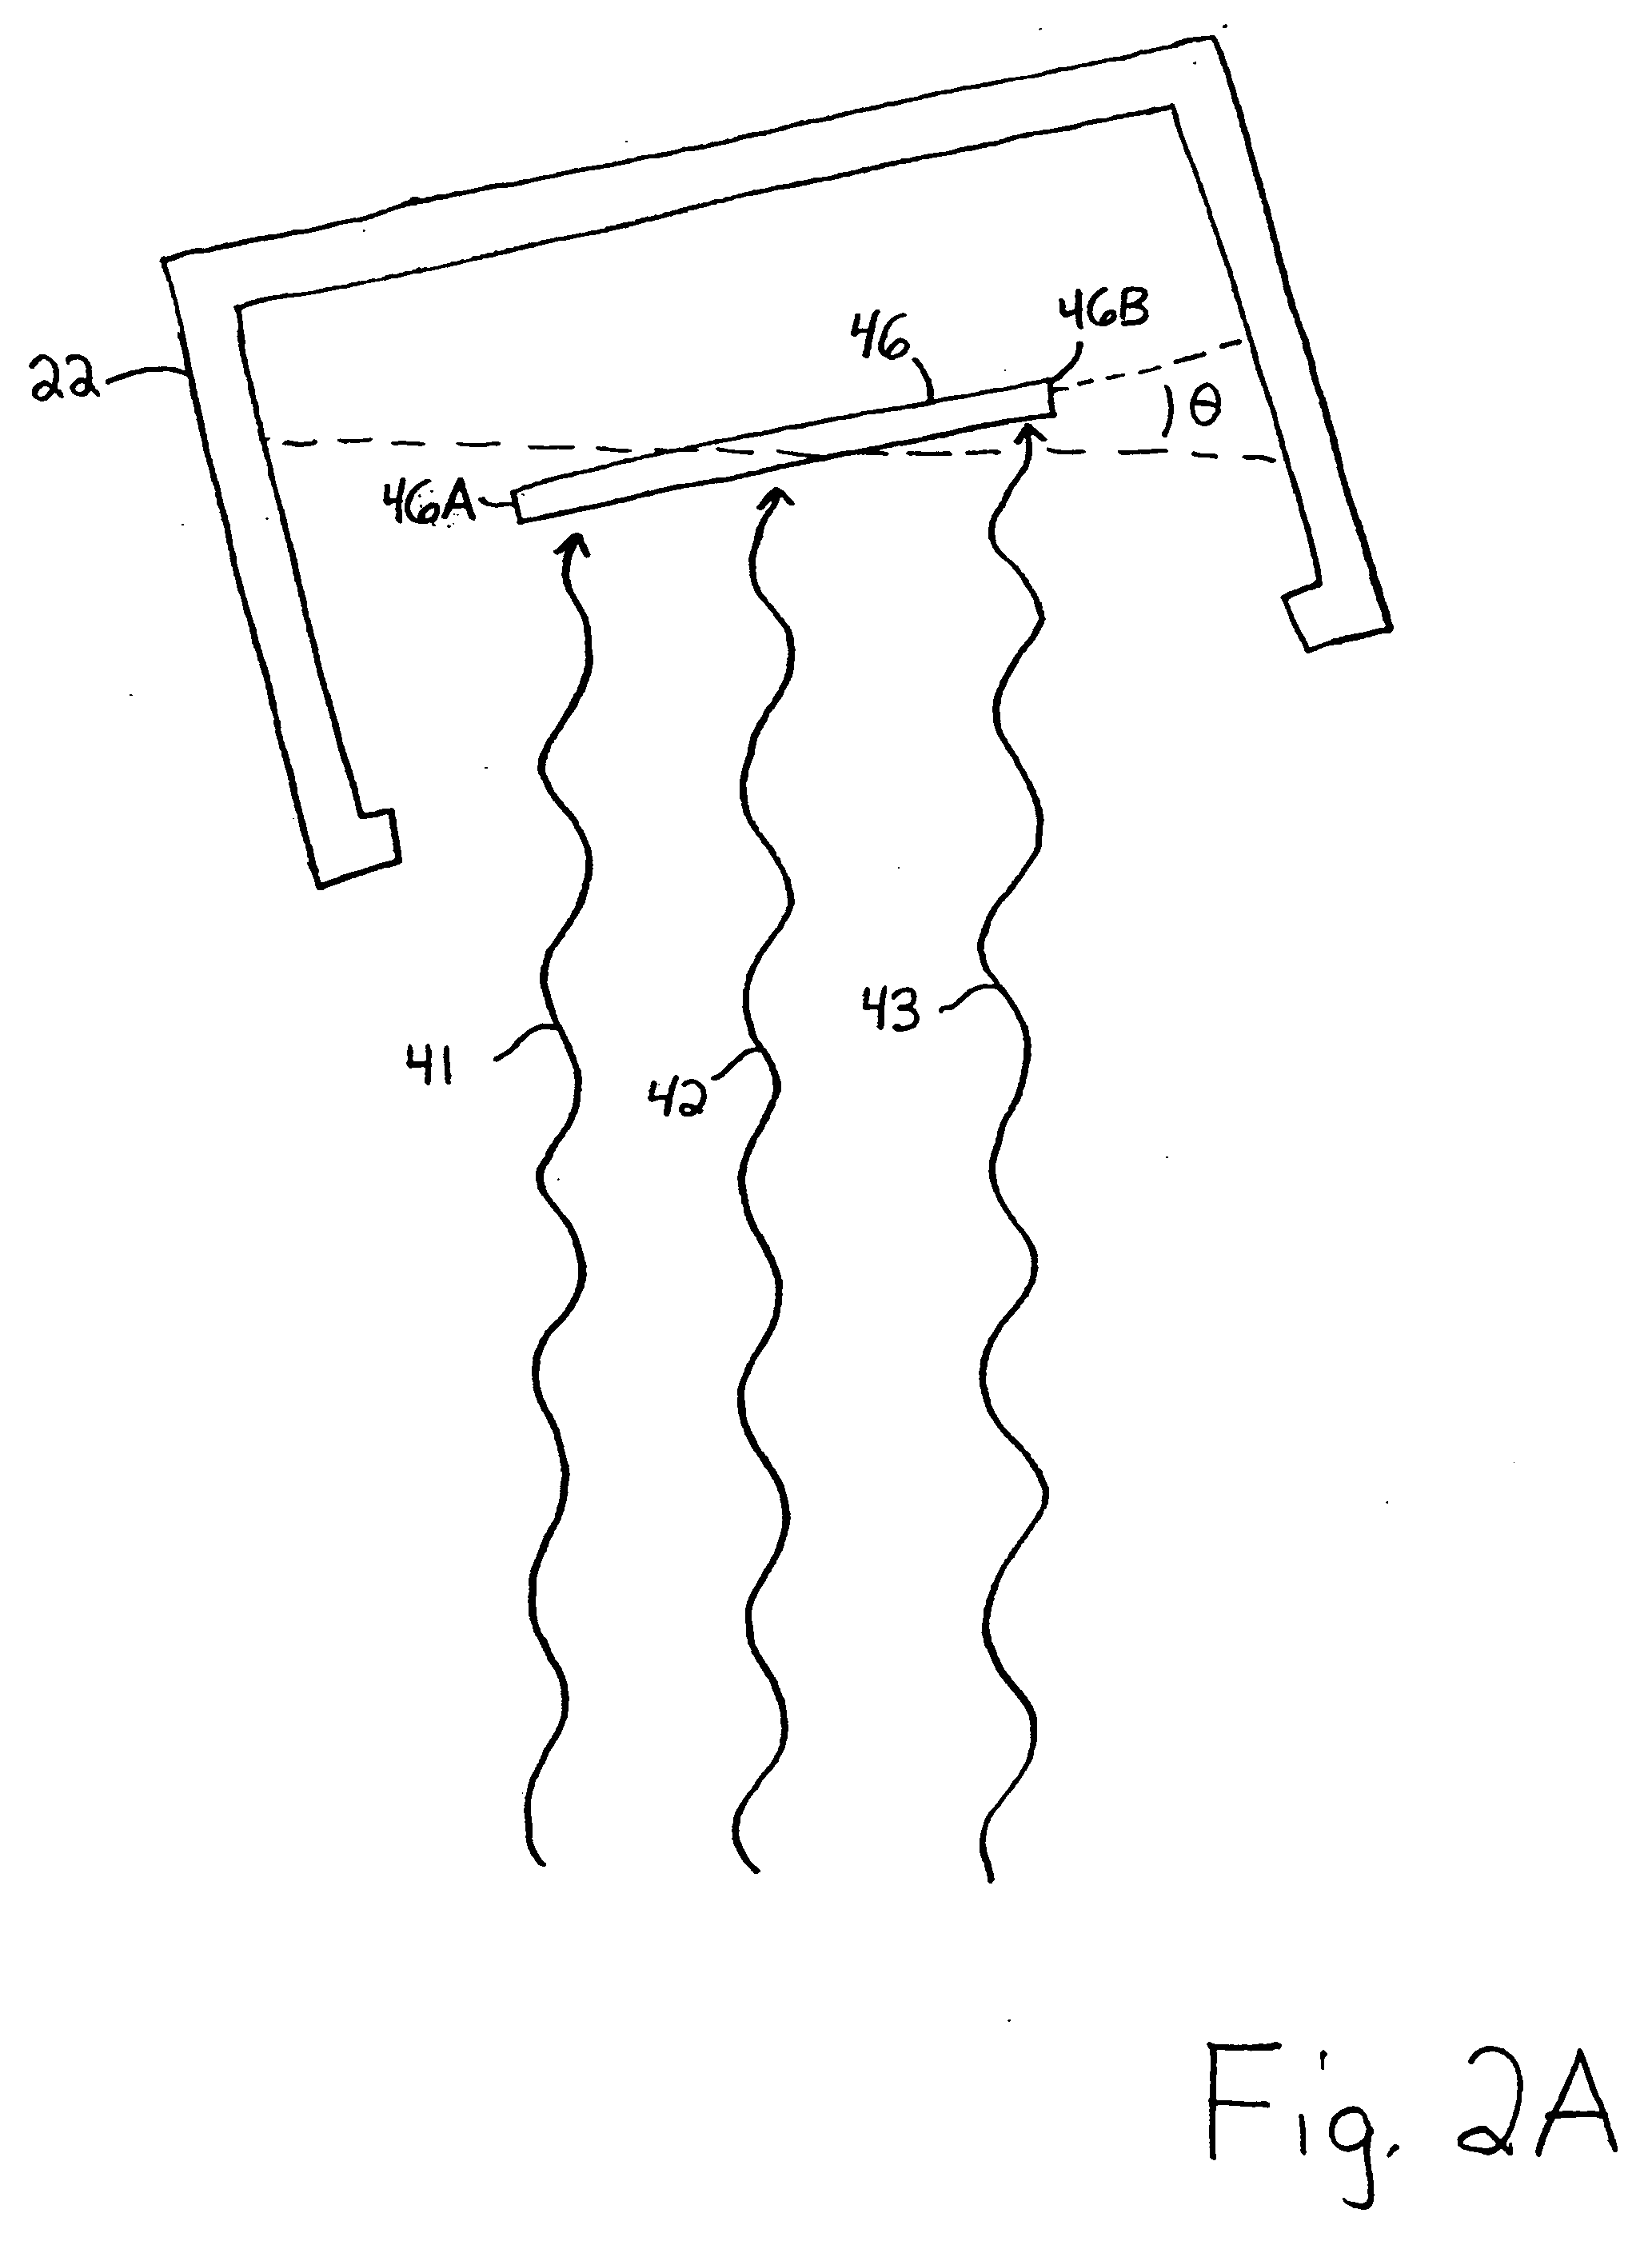 System and method for generating digital images of a microscope slide